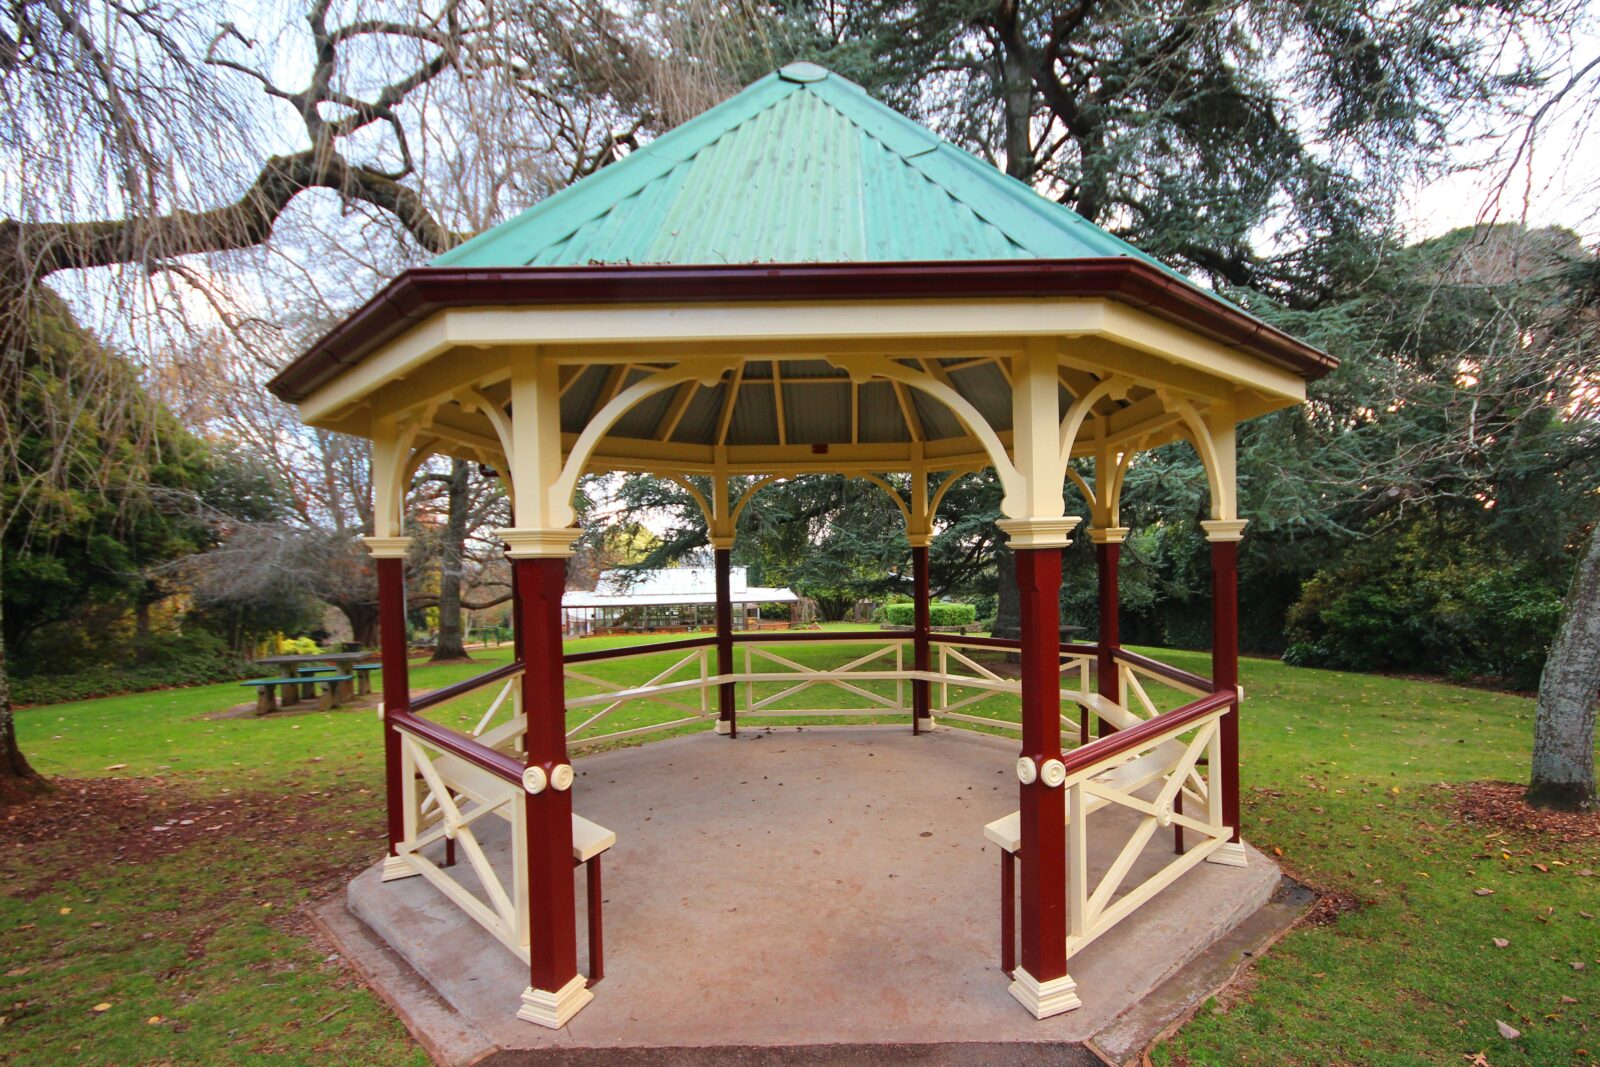 A heritage style rotunda at the Wombat Hill Boatnic Gardens